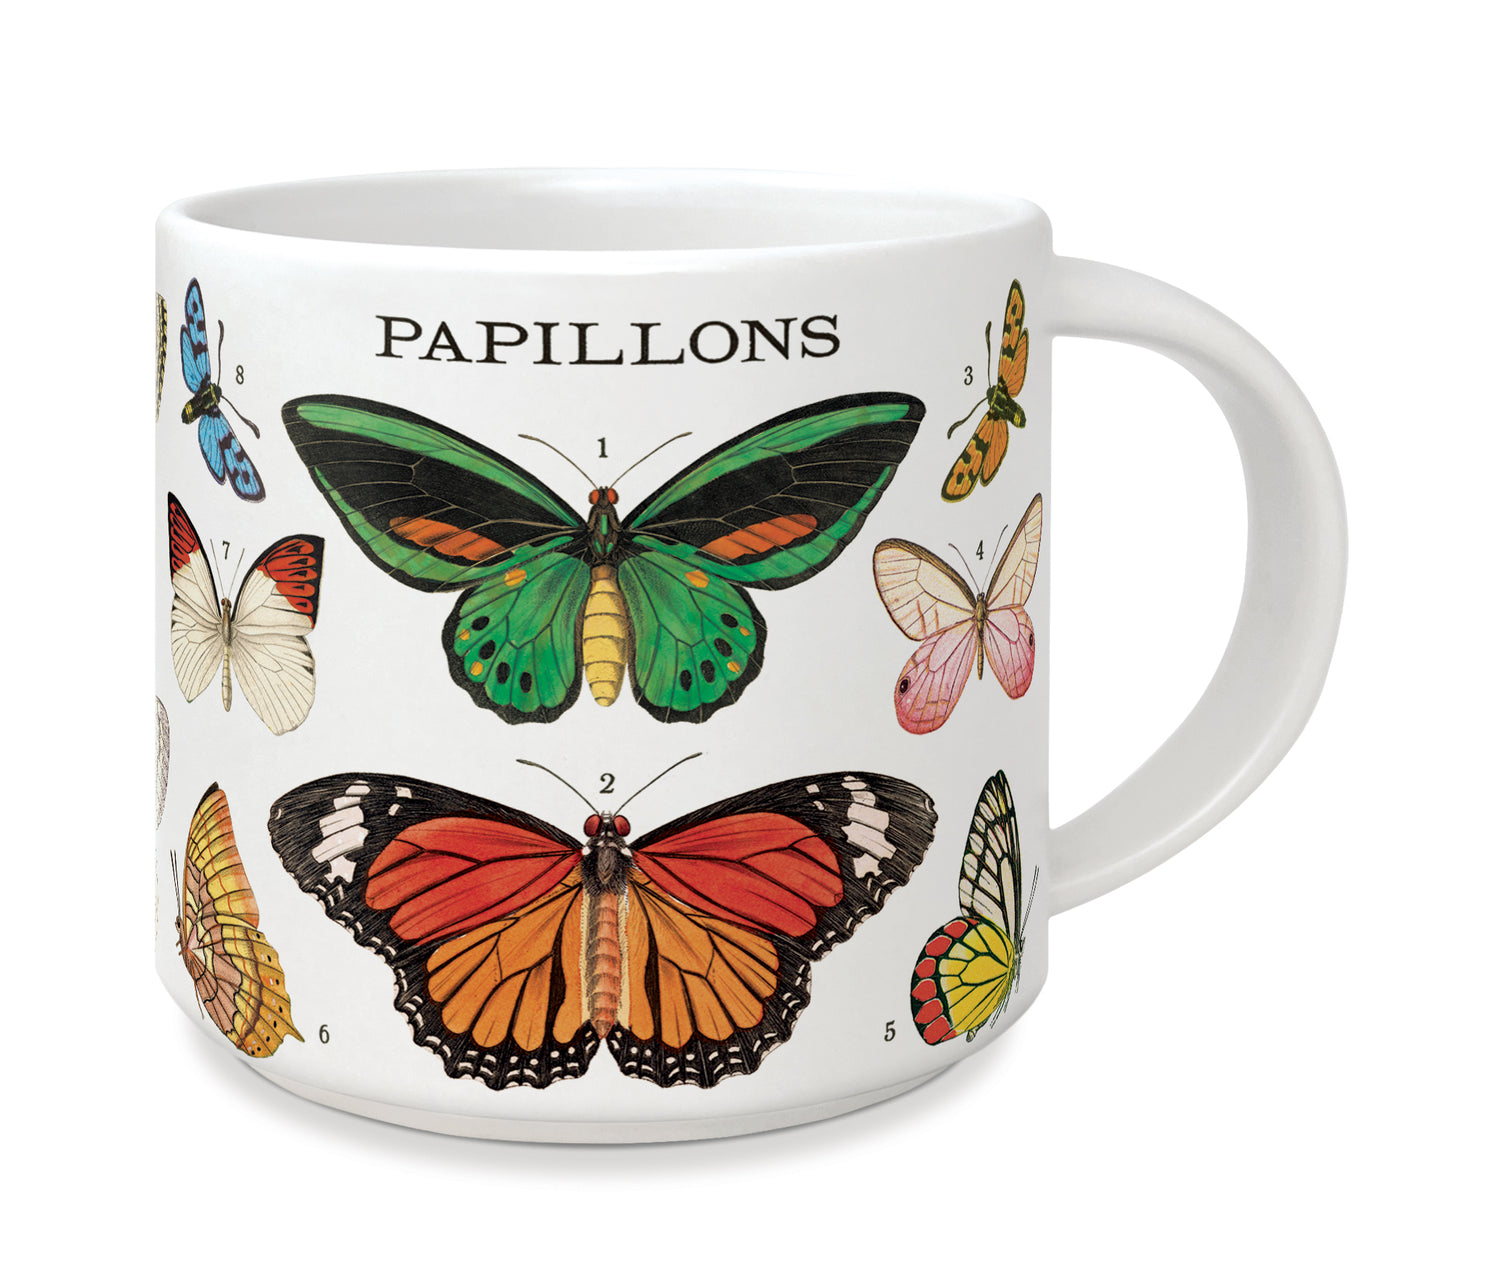 A Butterflies Ceramic Mug featuring butterflies, packaged in a decorative gift box from Cavallini Papers &amp; Co.